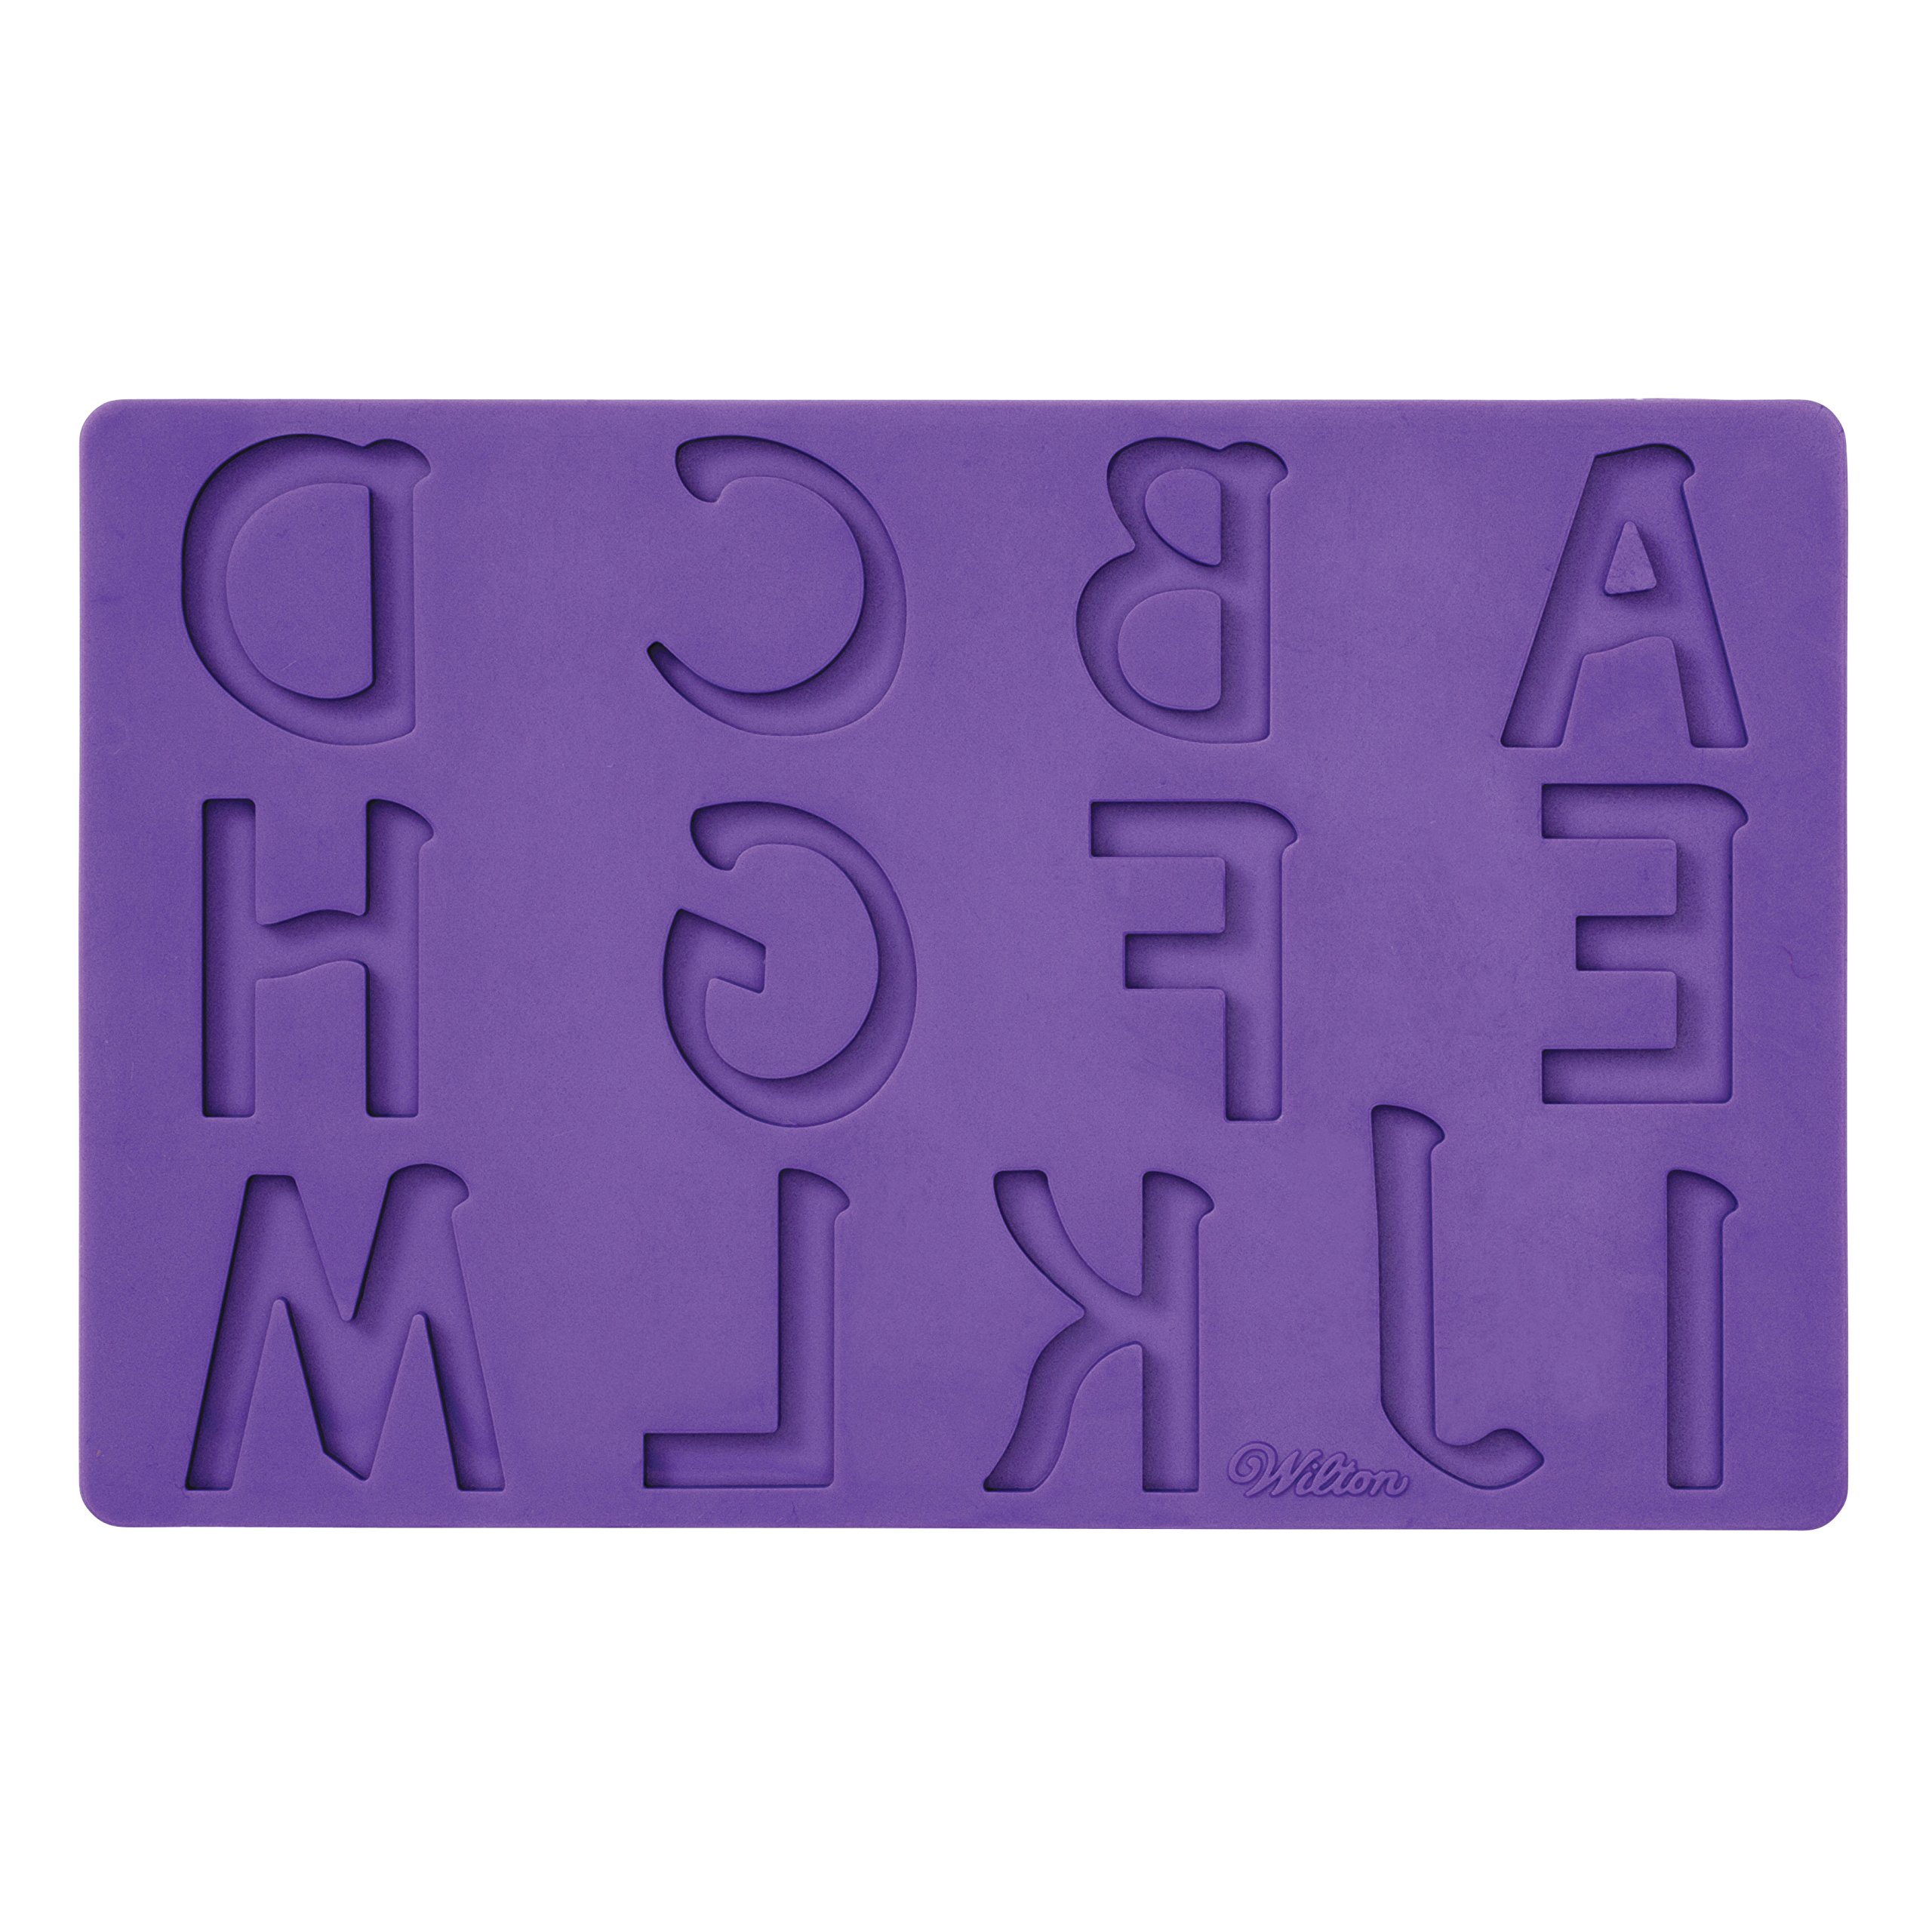 Wilton Silicone Letters and Numbers Fondant and Gum Paste Molds, 4-Piece - Cake Decorating Supplies